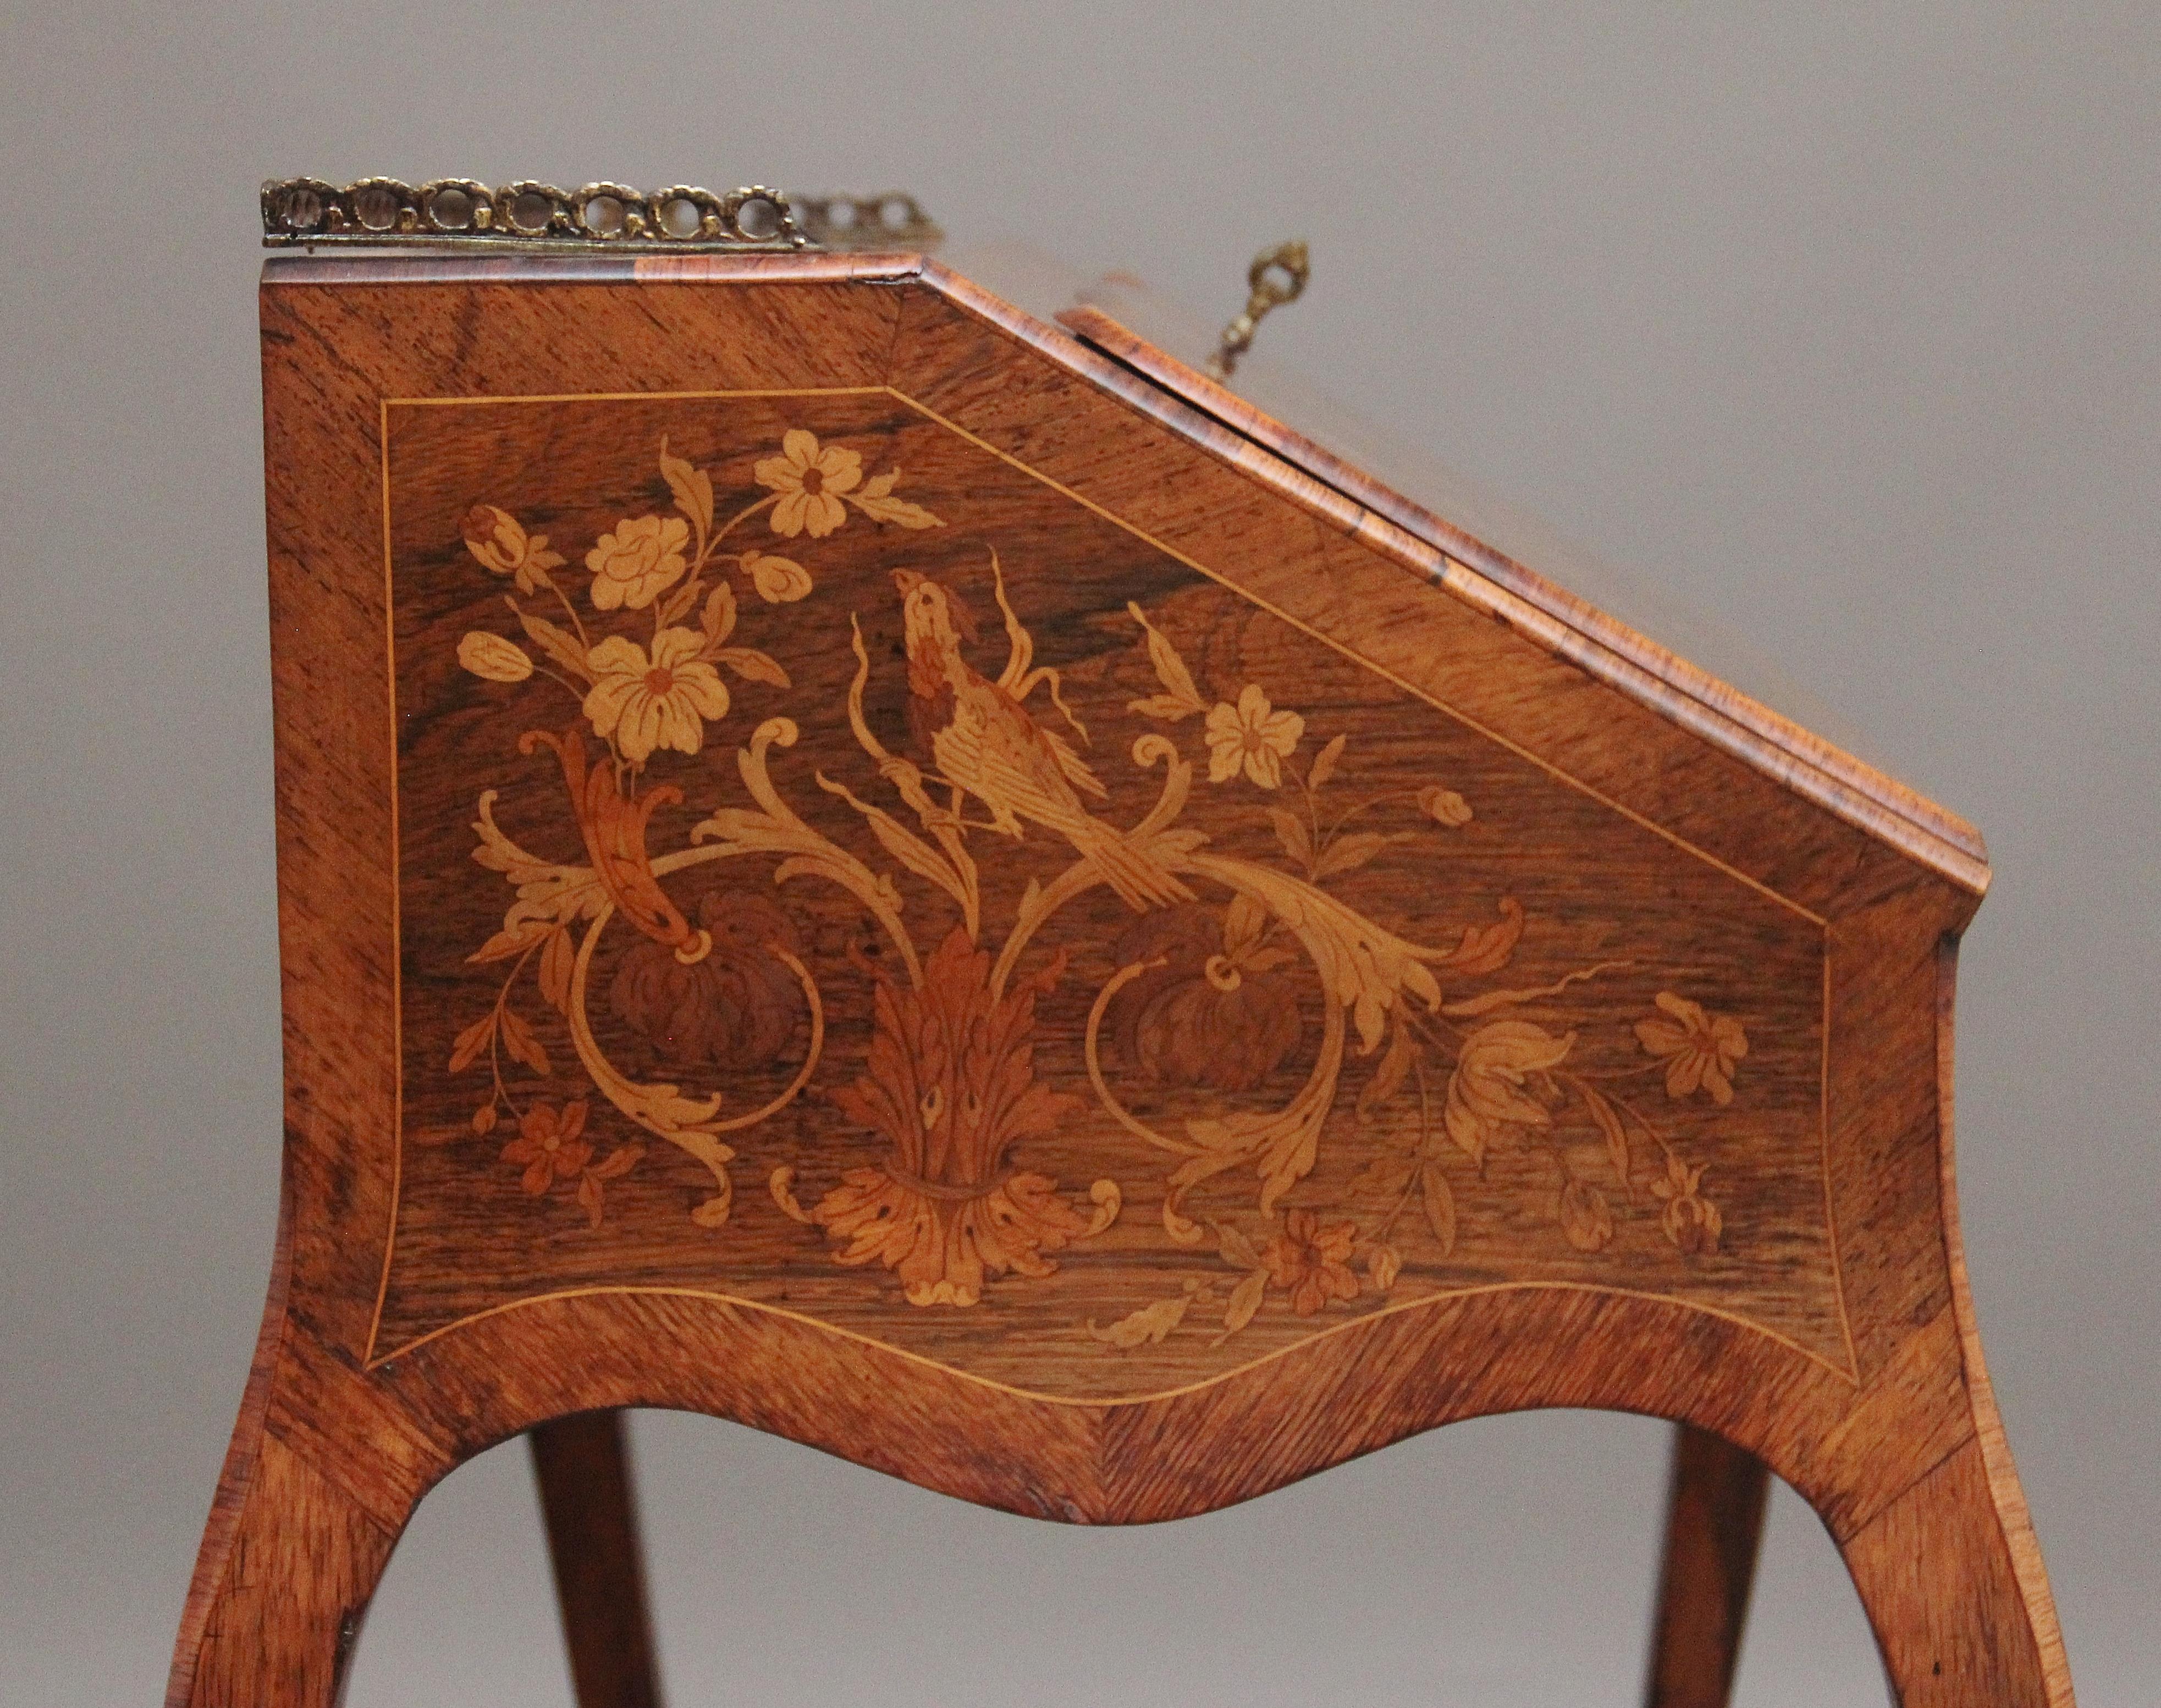 Superb Quality Freestanding 19th Century Kingwood and Marquetry Inlaid Bureau For Sale 8